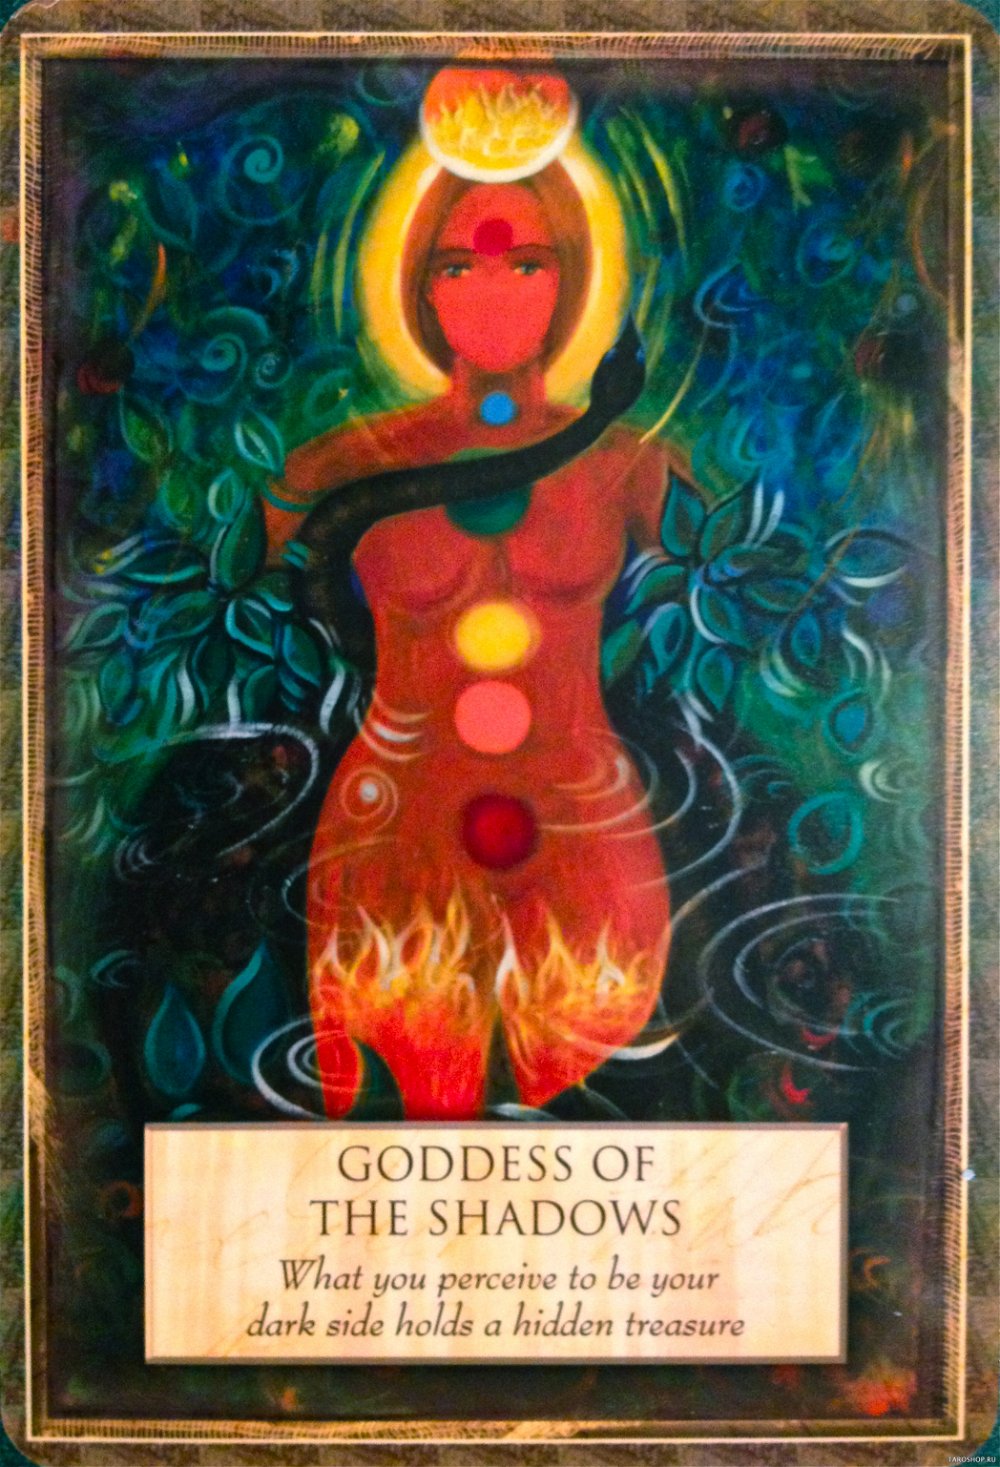 Angels, Gods and Goddesses Oracle. Оракул Ангелы, Боги и Богини